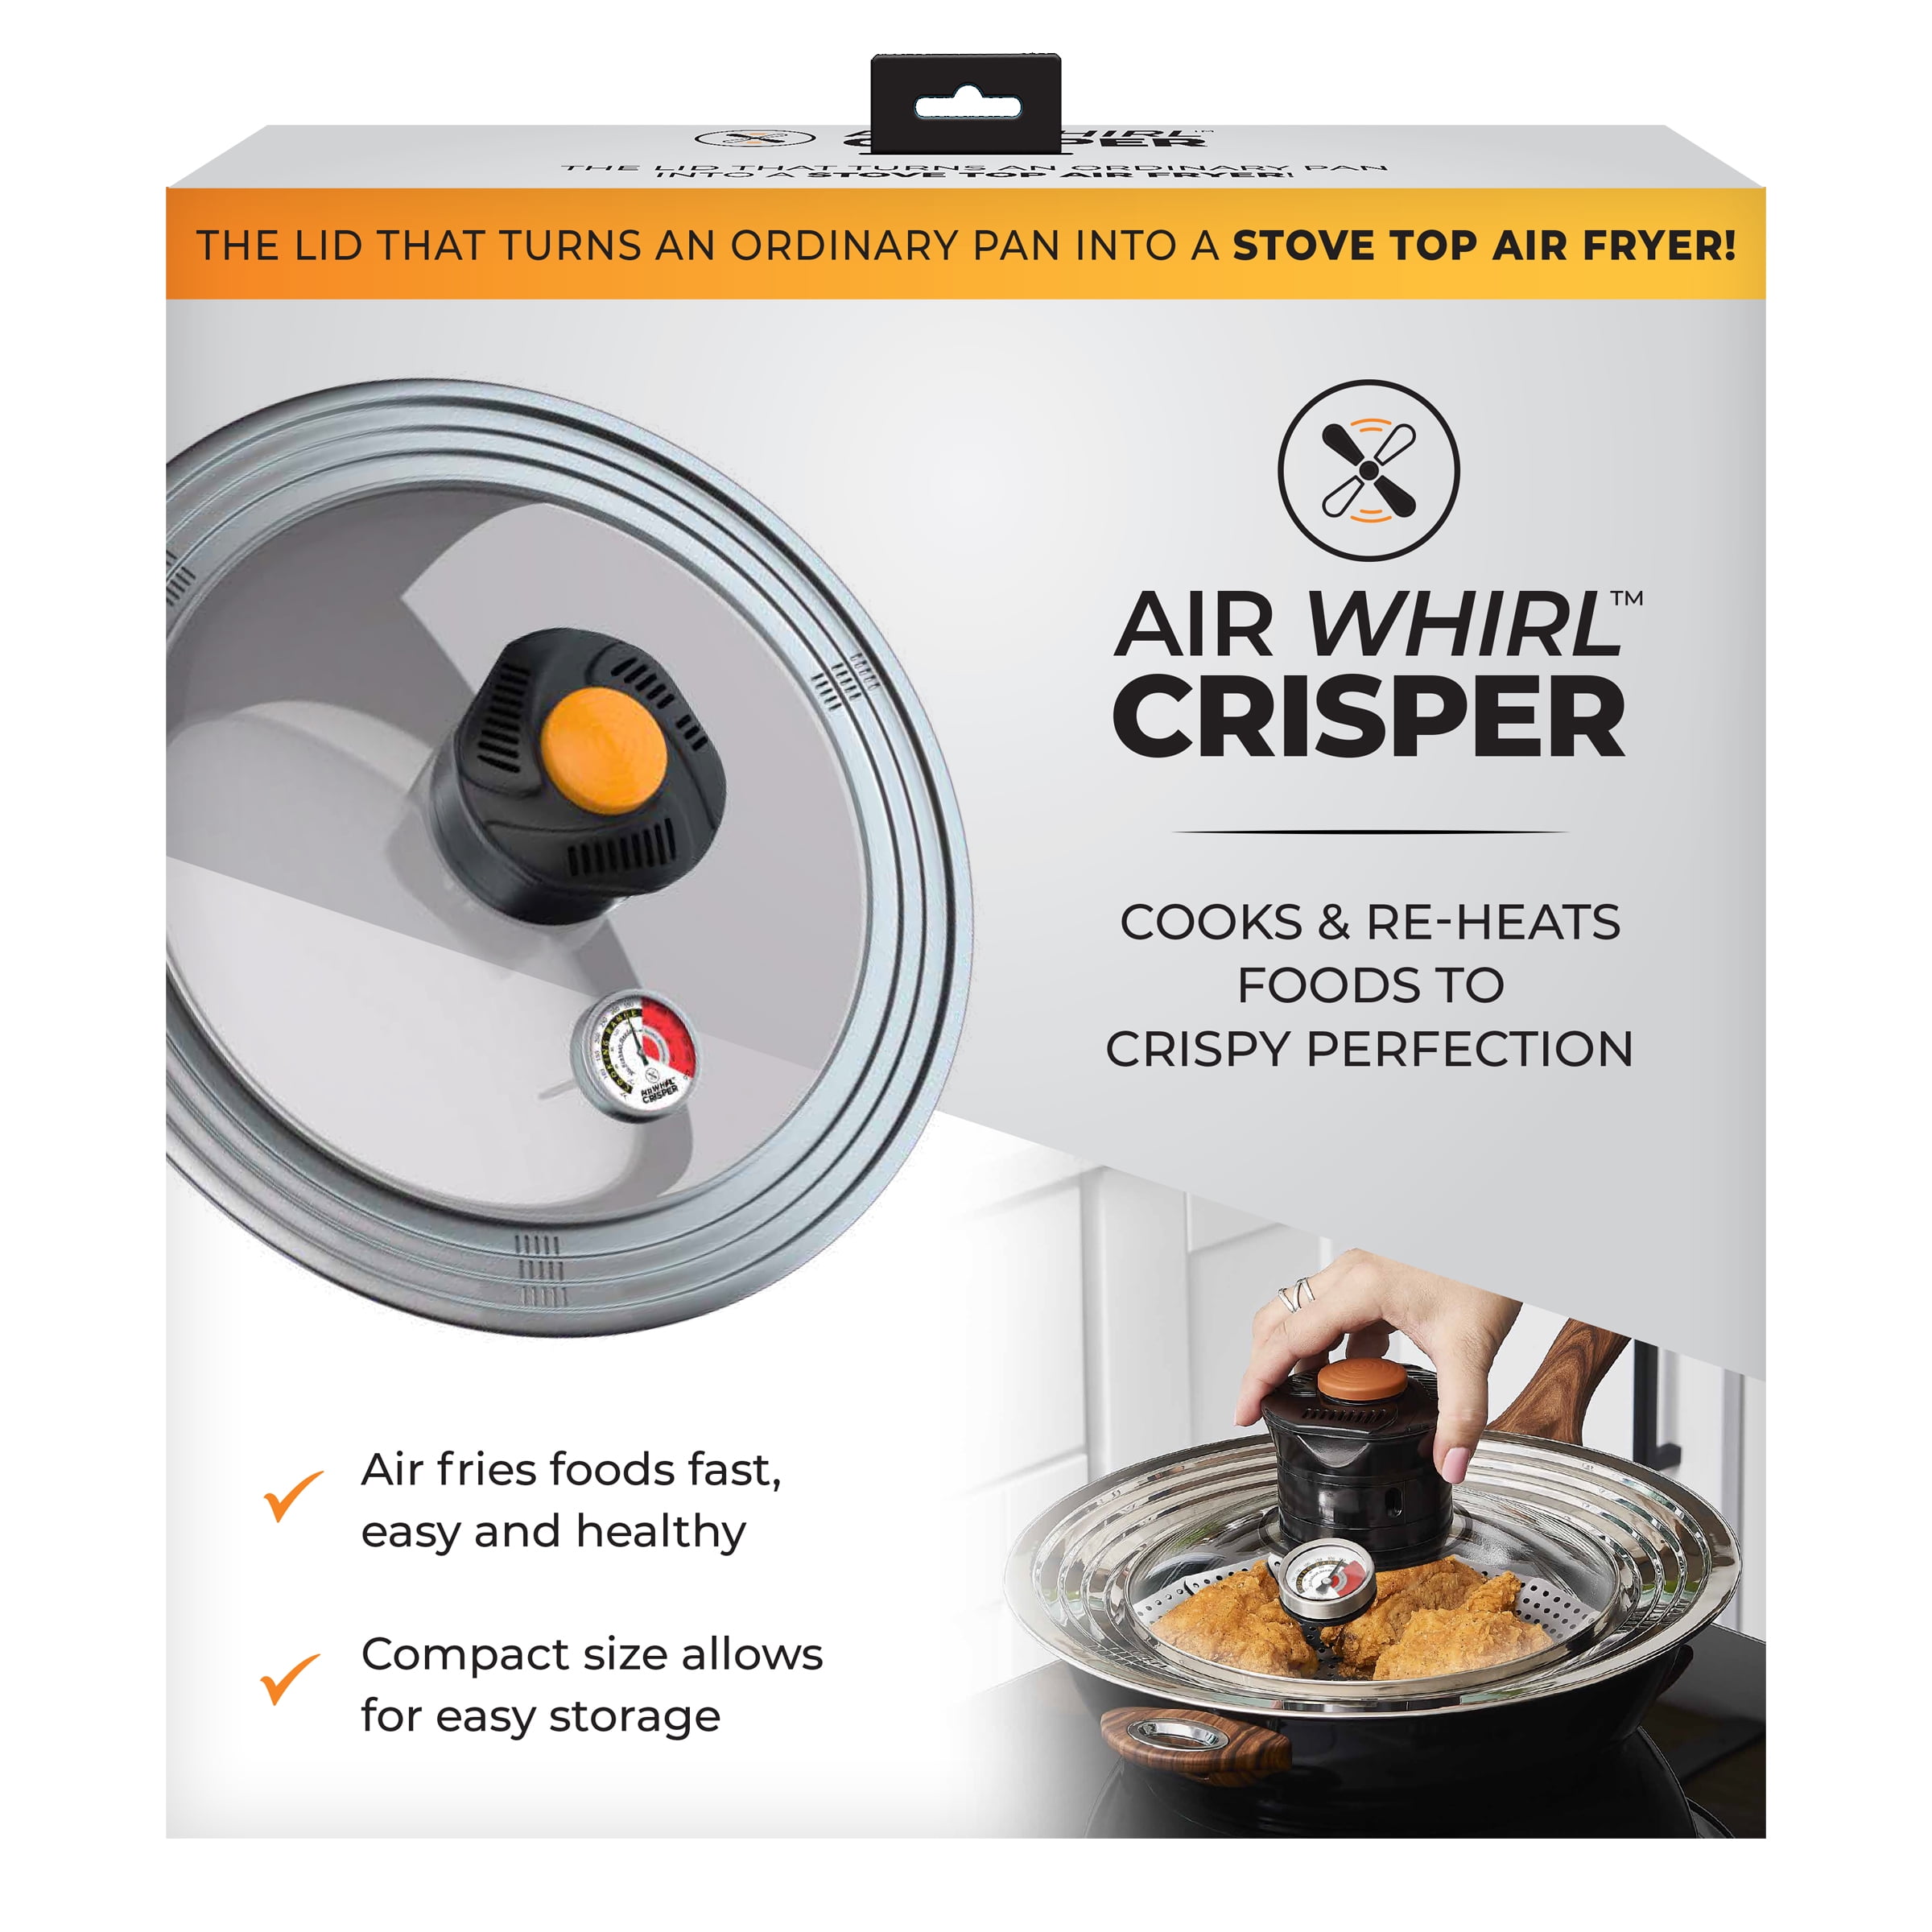 What is the temperature range for air frying using Air Fryer Lid